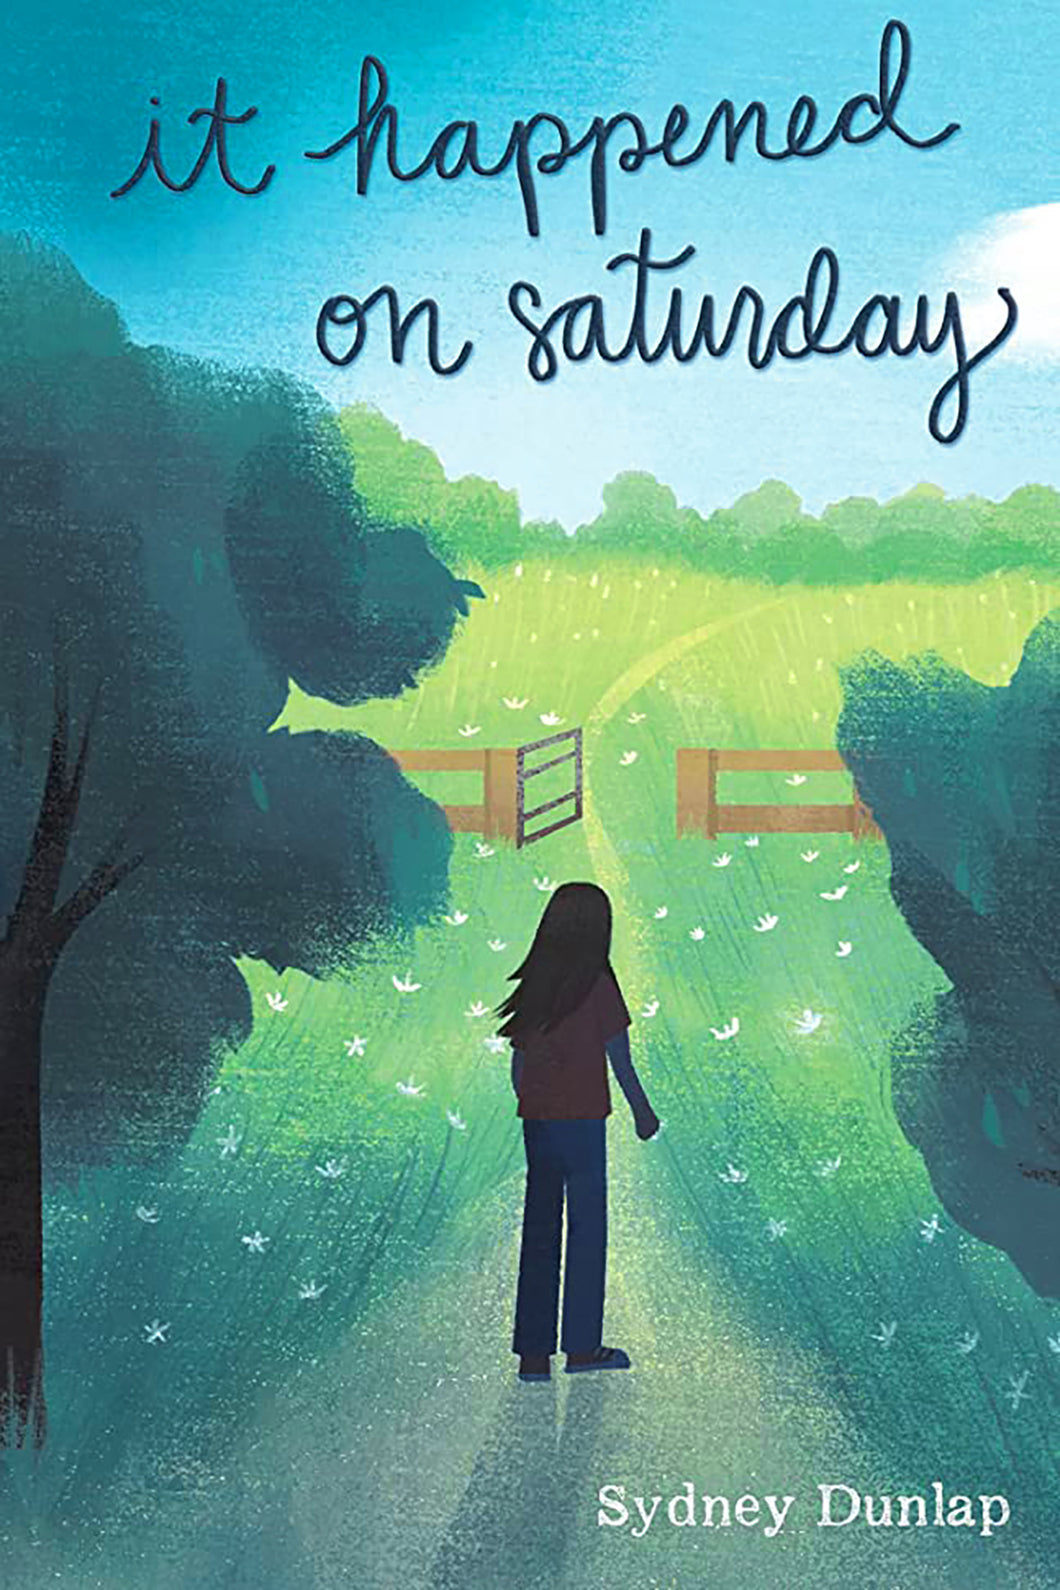 It Happened on Satuday by Sydney Dunlap / Hardcover - NEW BOOK